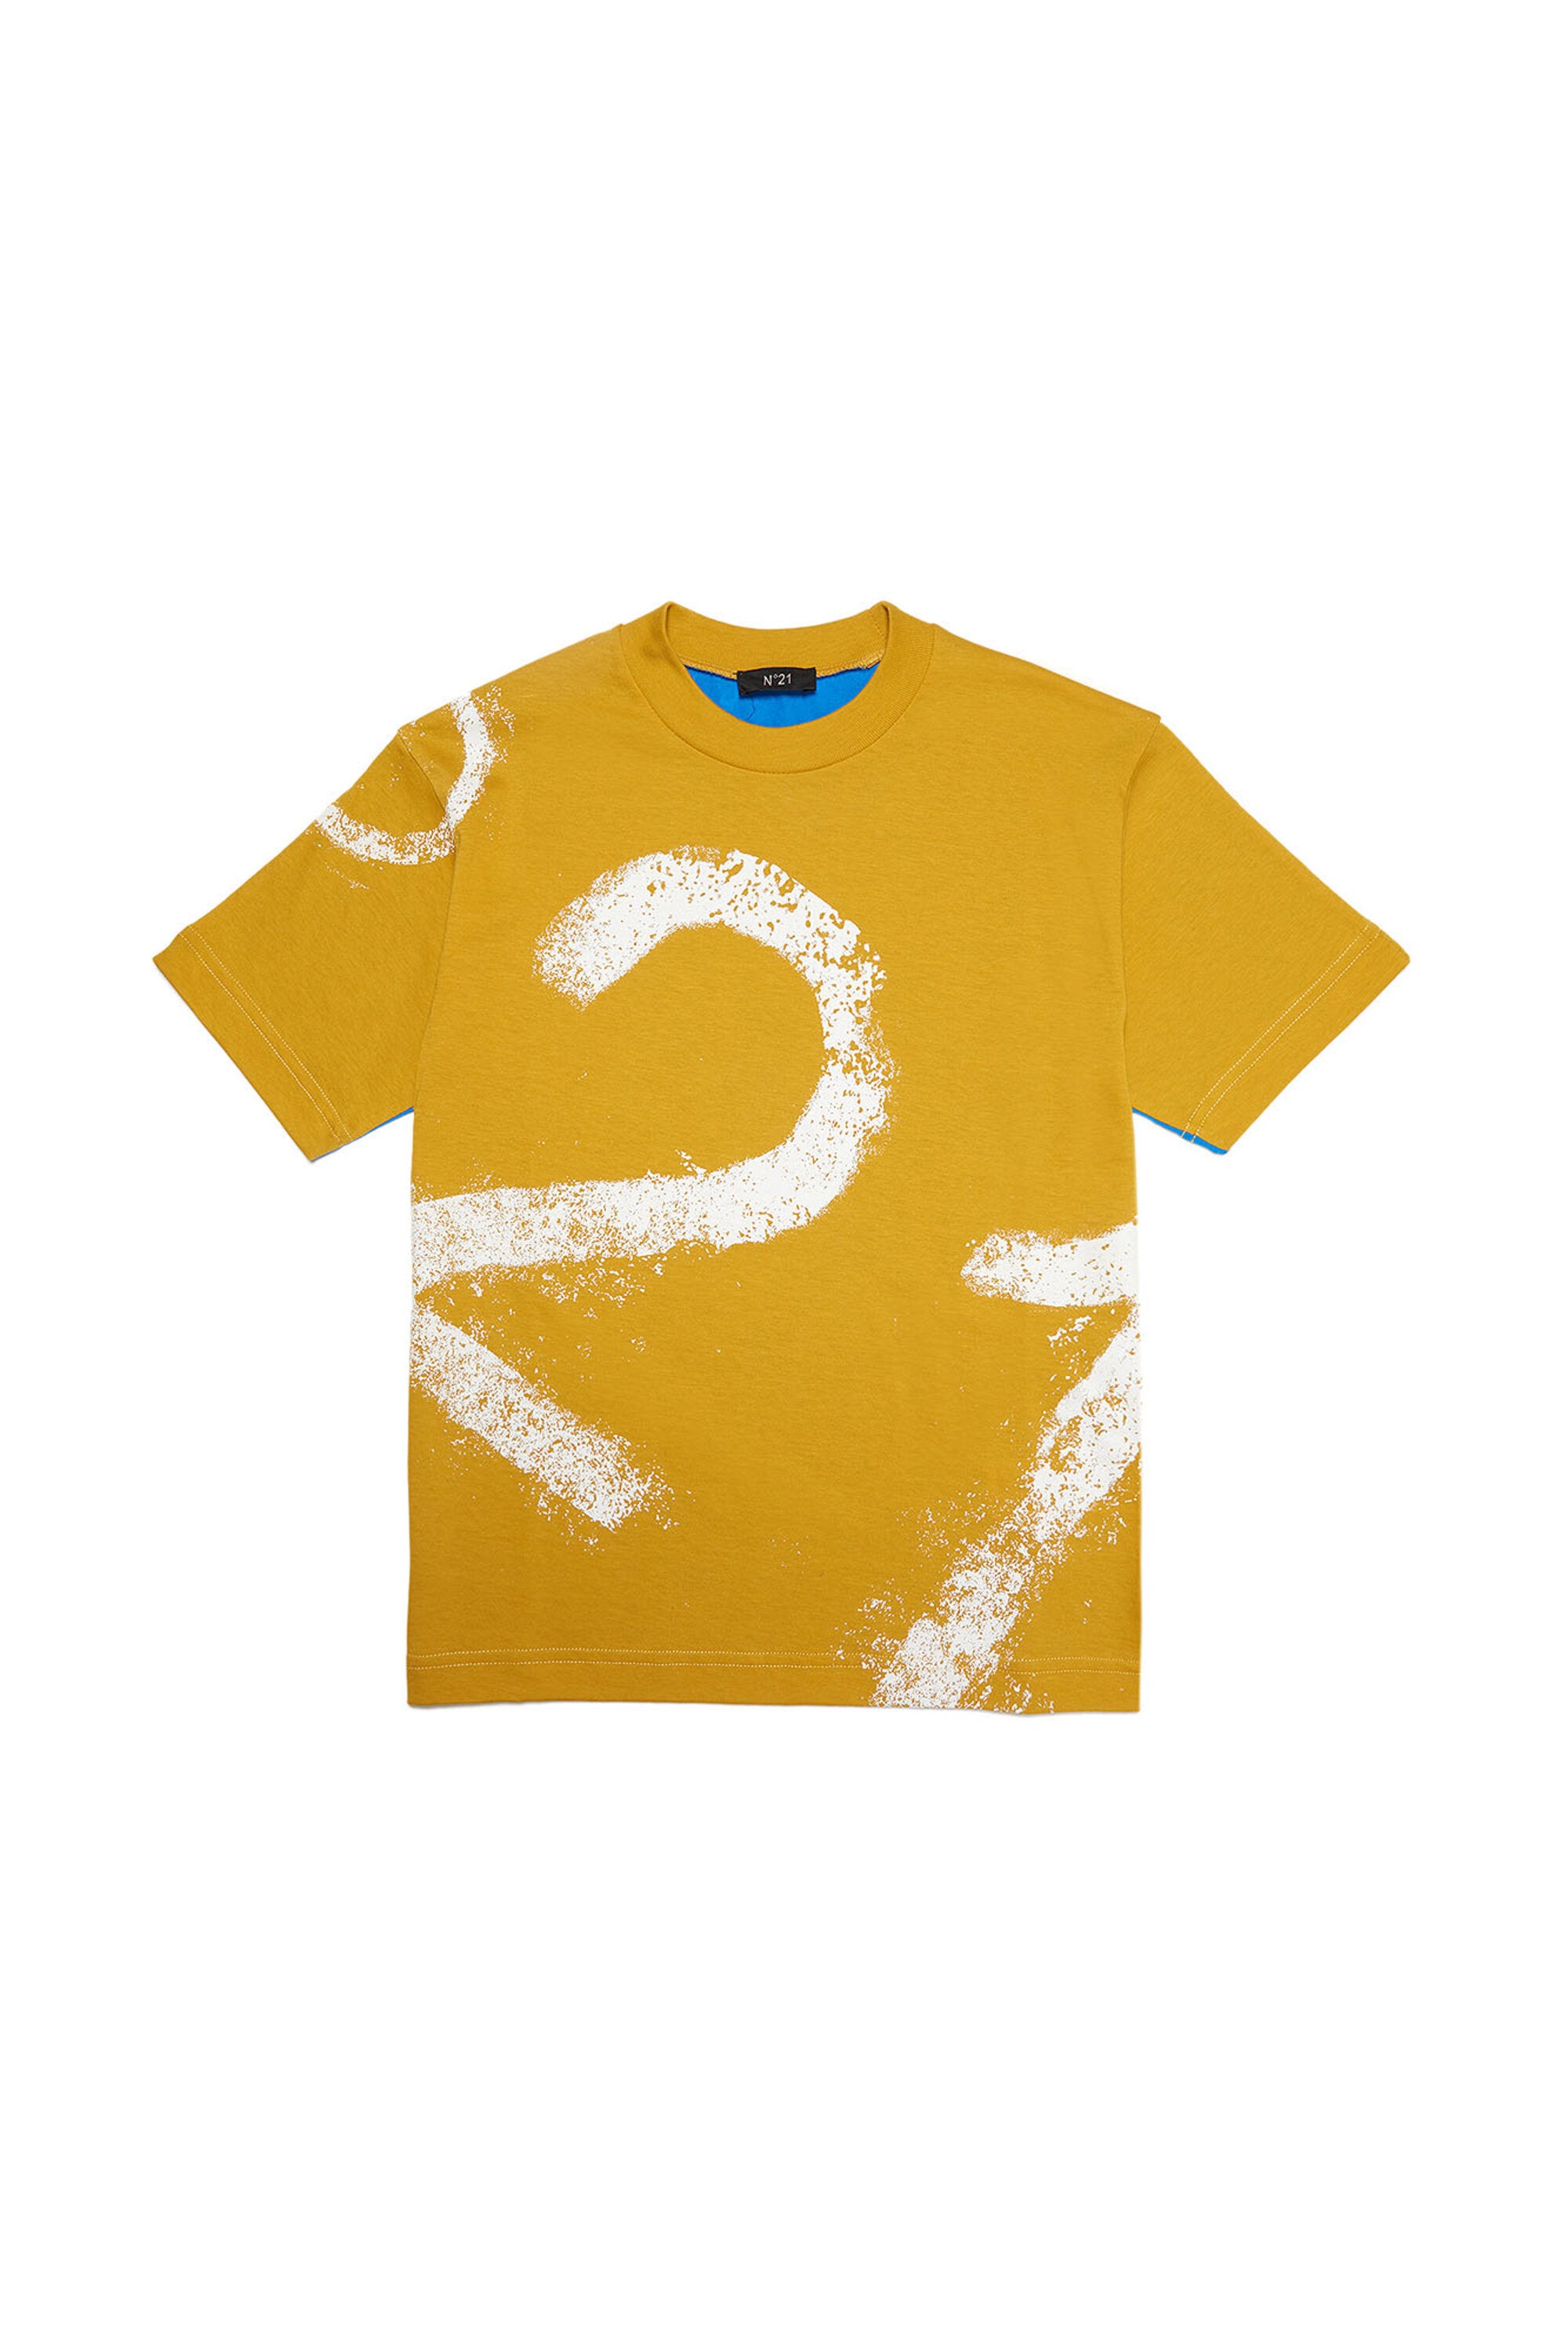 N°21 yellow and light blue two-tone jersey t-shirt with vintage effect logo  for children